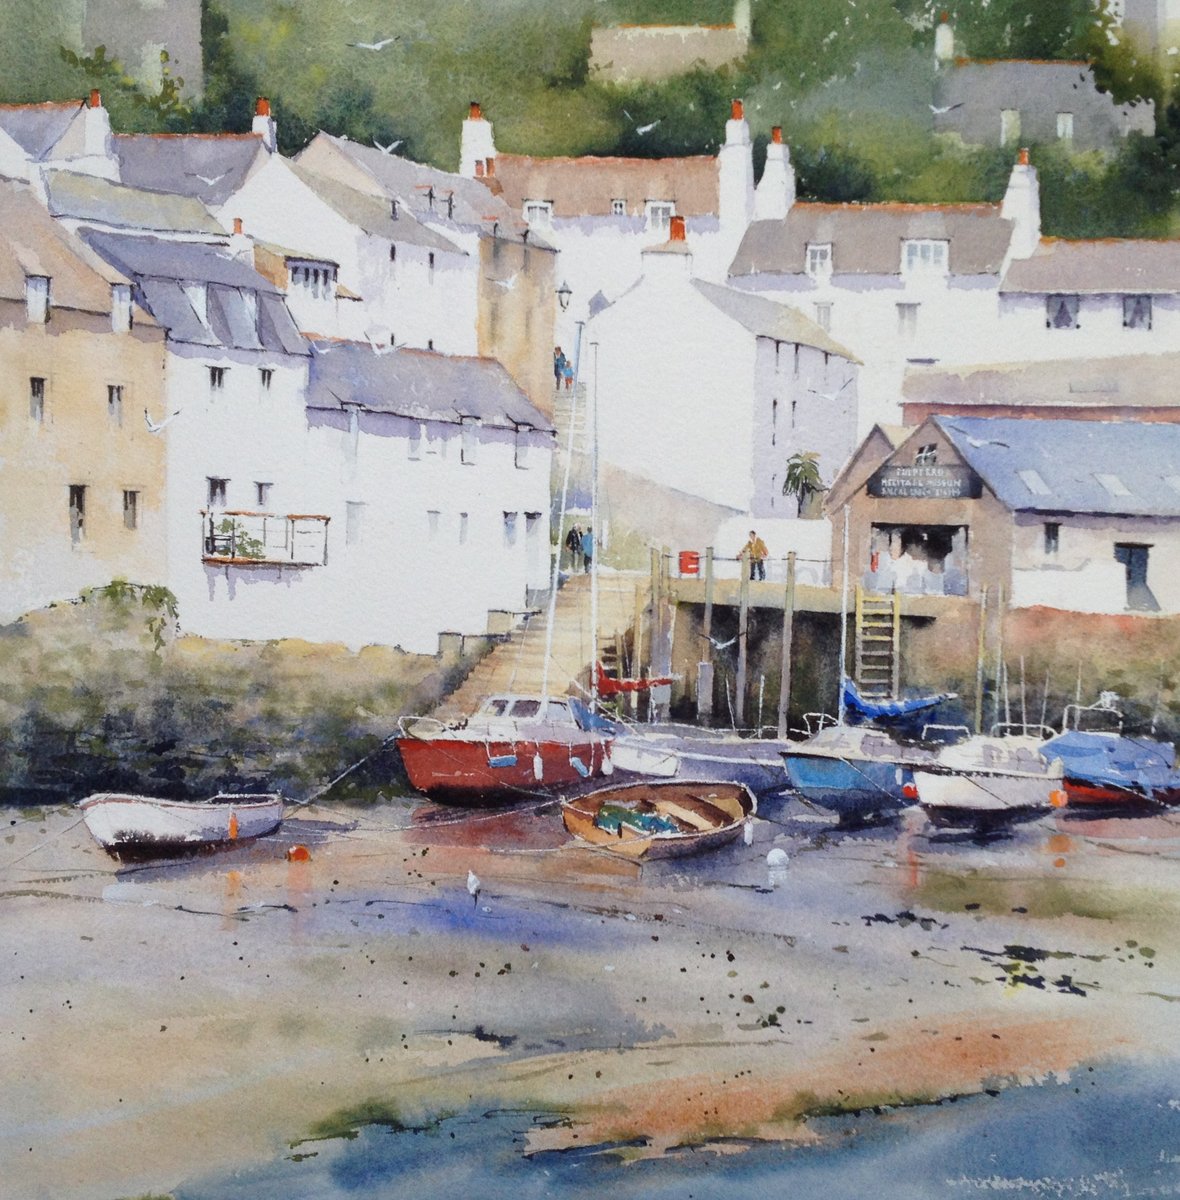 Polperro Harbour: WatercolourImage with link to high resolution version